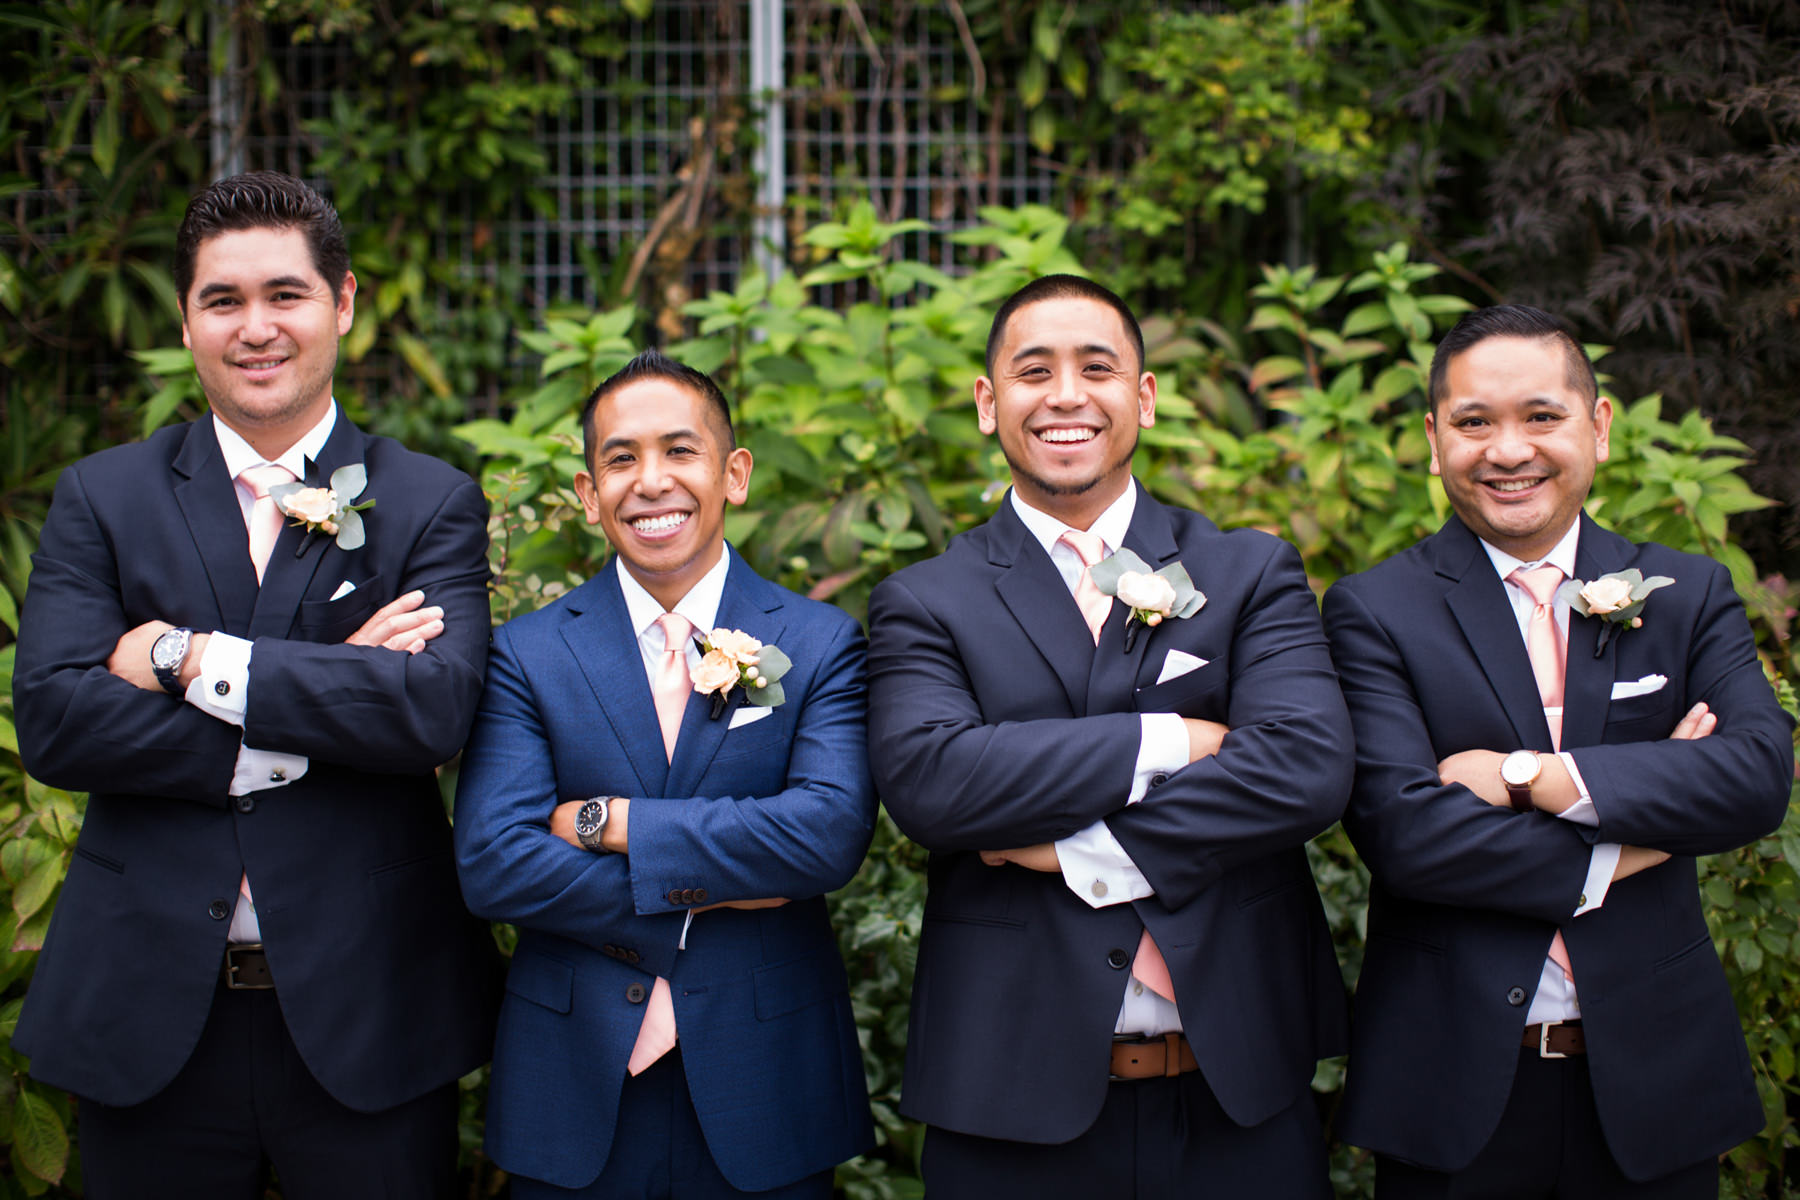 Chihuly Garden and Glass Wedding Photos Groomsmen